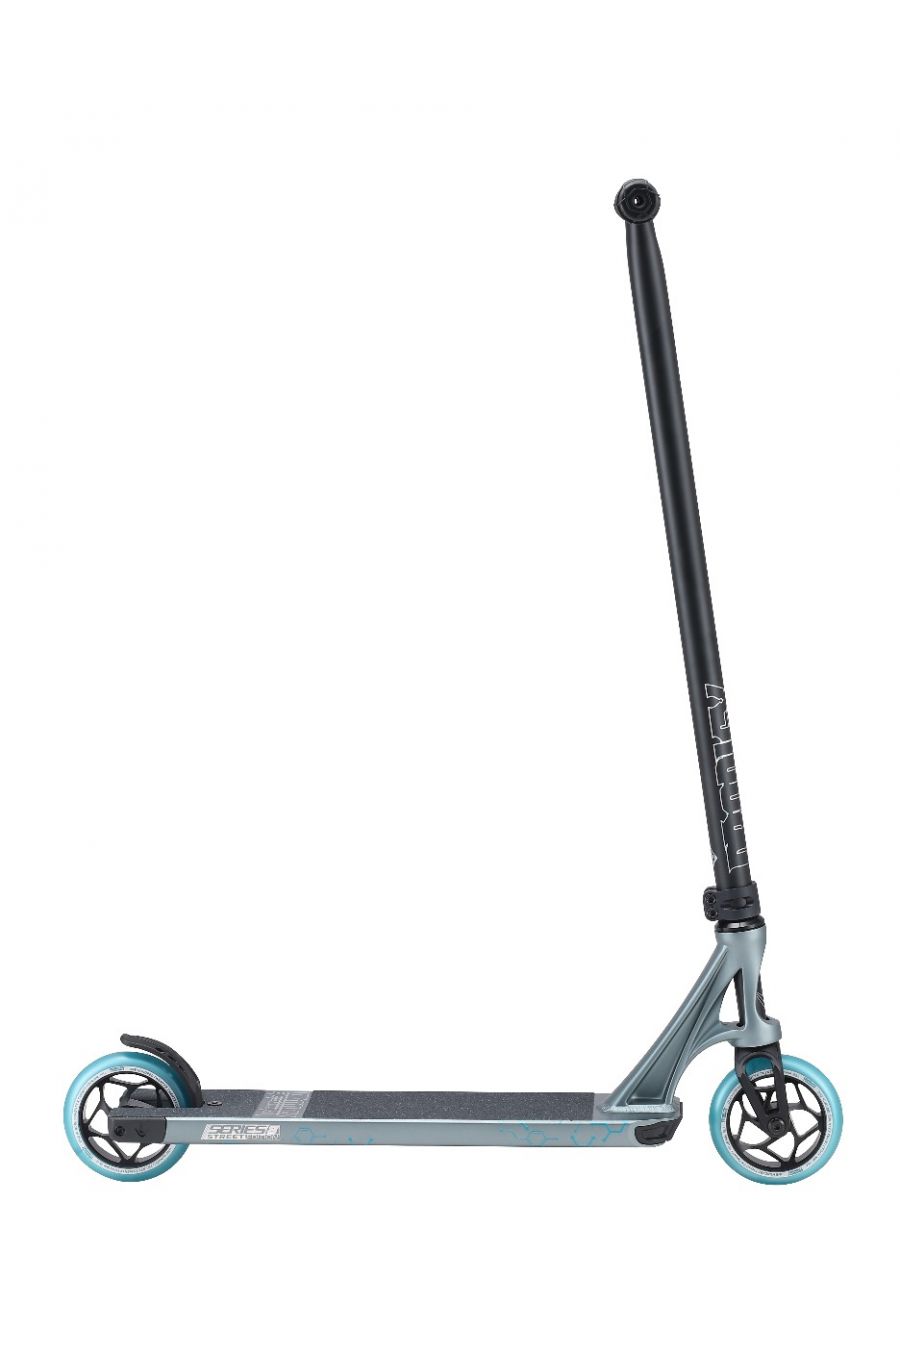 Envy Prodigy S8 Complete Scooter (Street Grey)